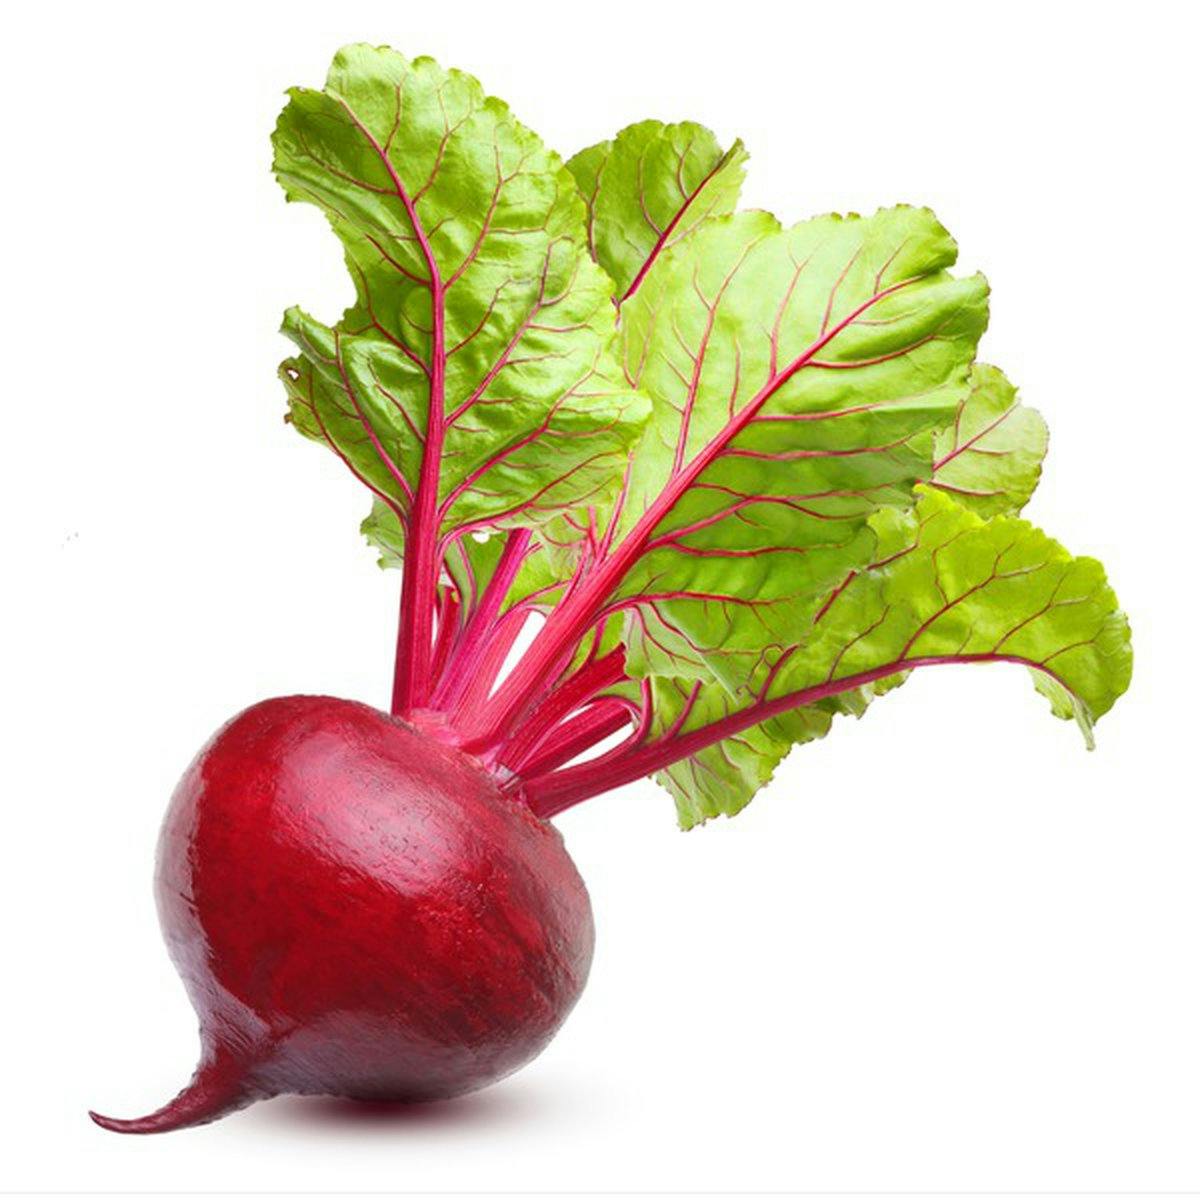 beets (preferably different colors)